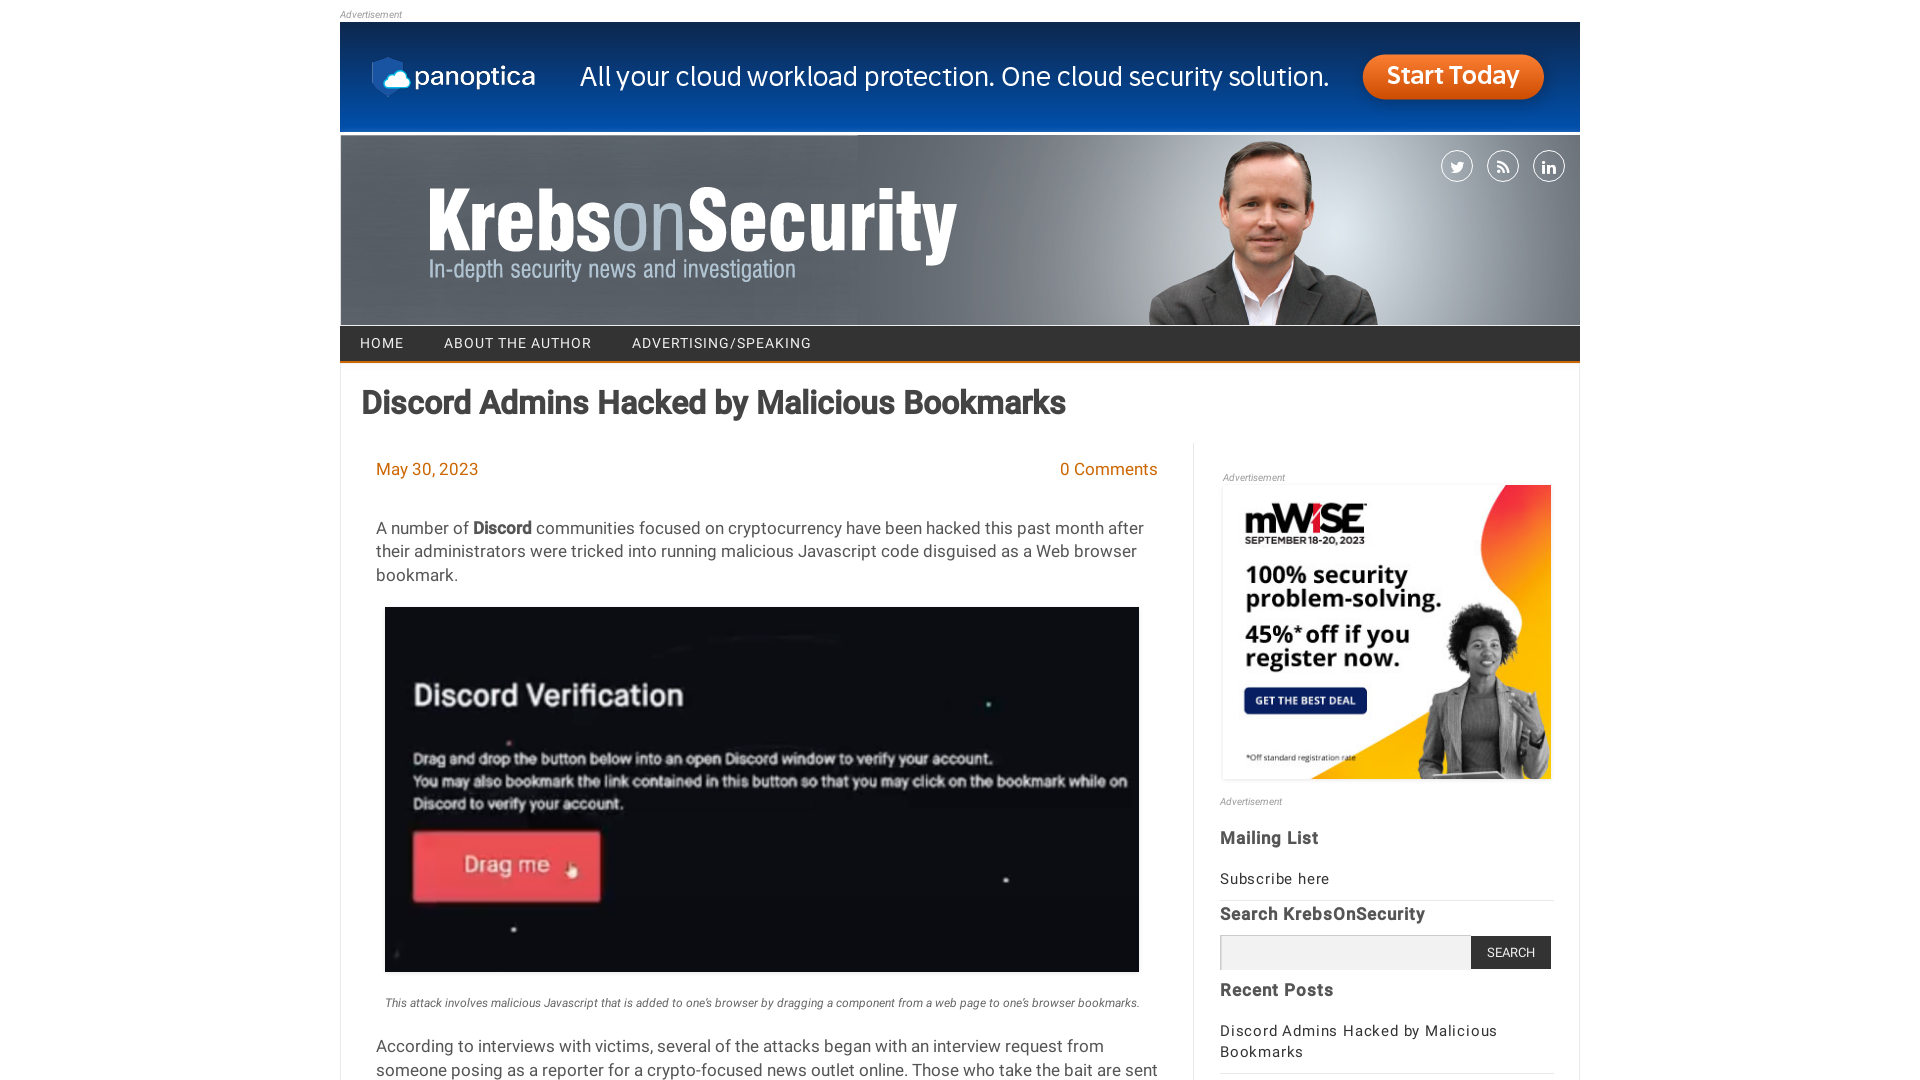 Discord Admins Hacked by Malicious Bookmarks – Krebs on Security